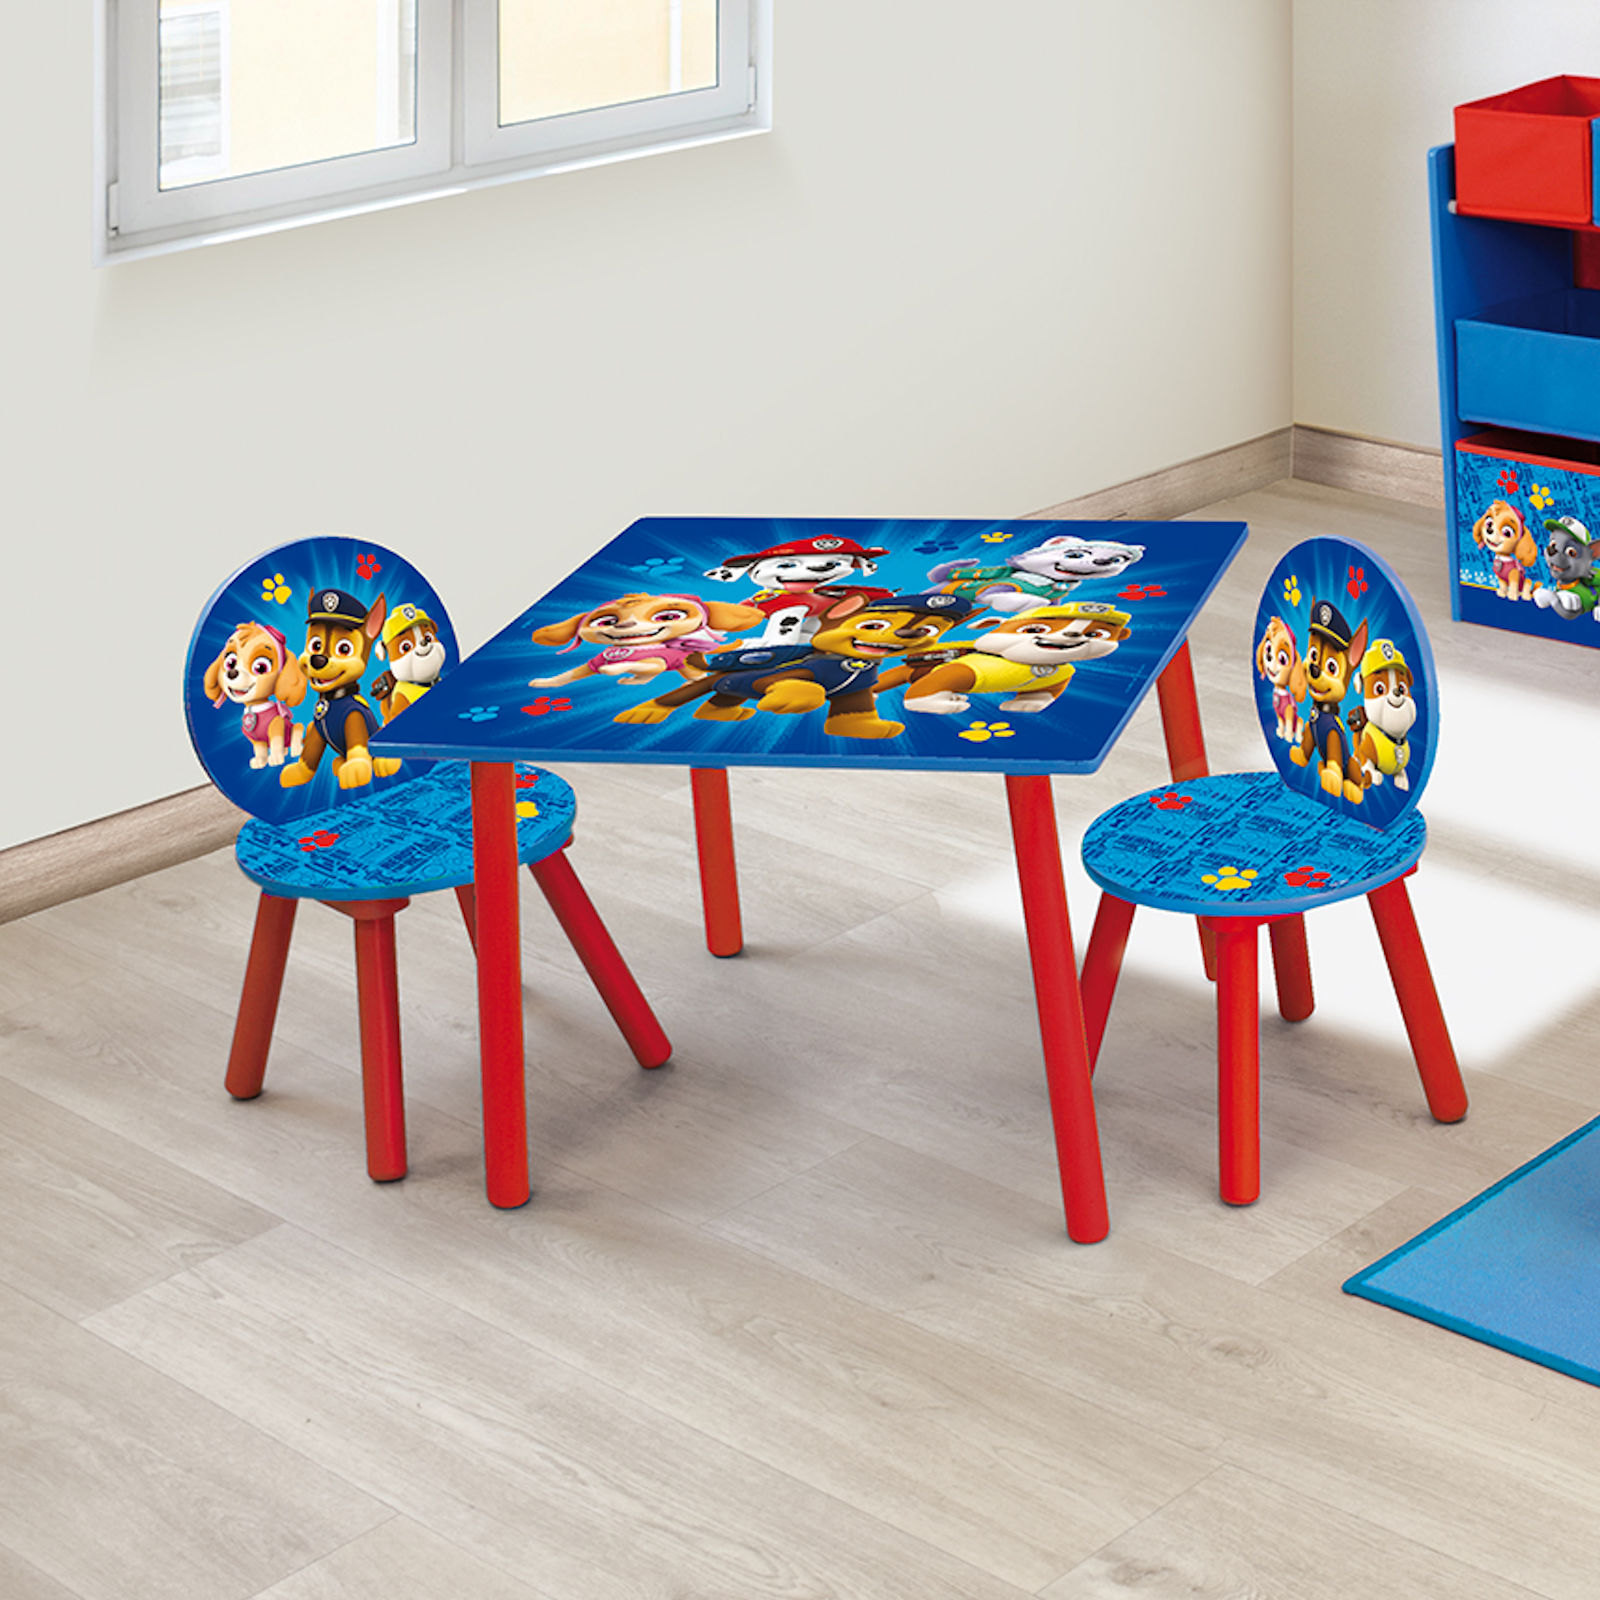 Paw Patrol Wooden Table & Chairs Set – Blue